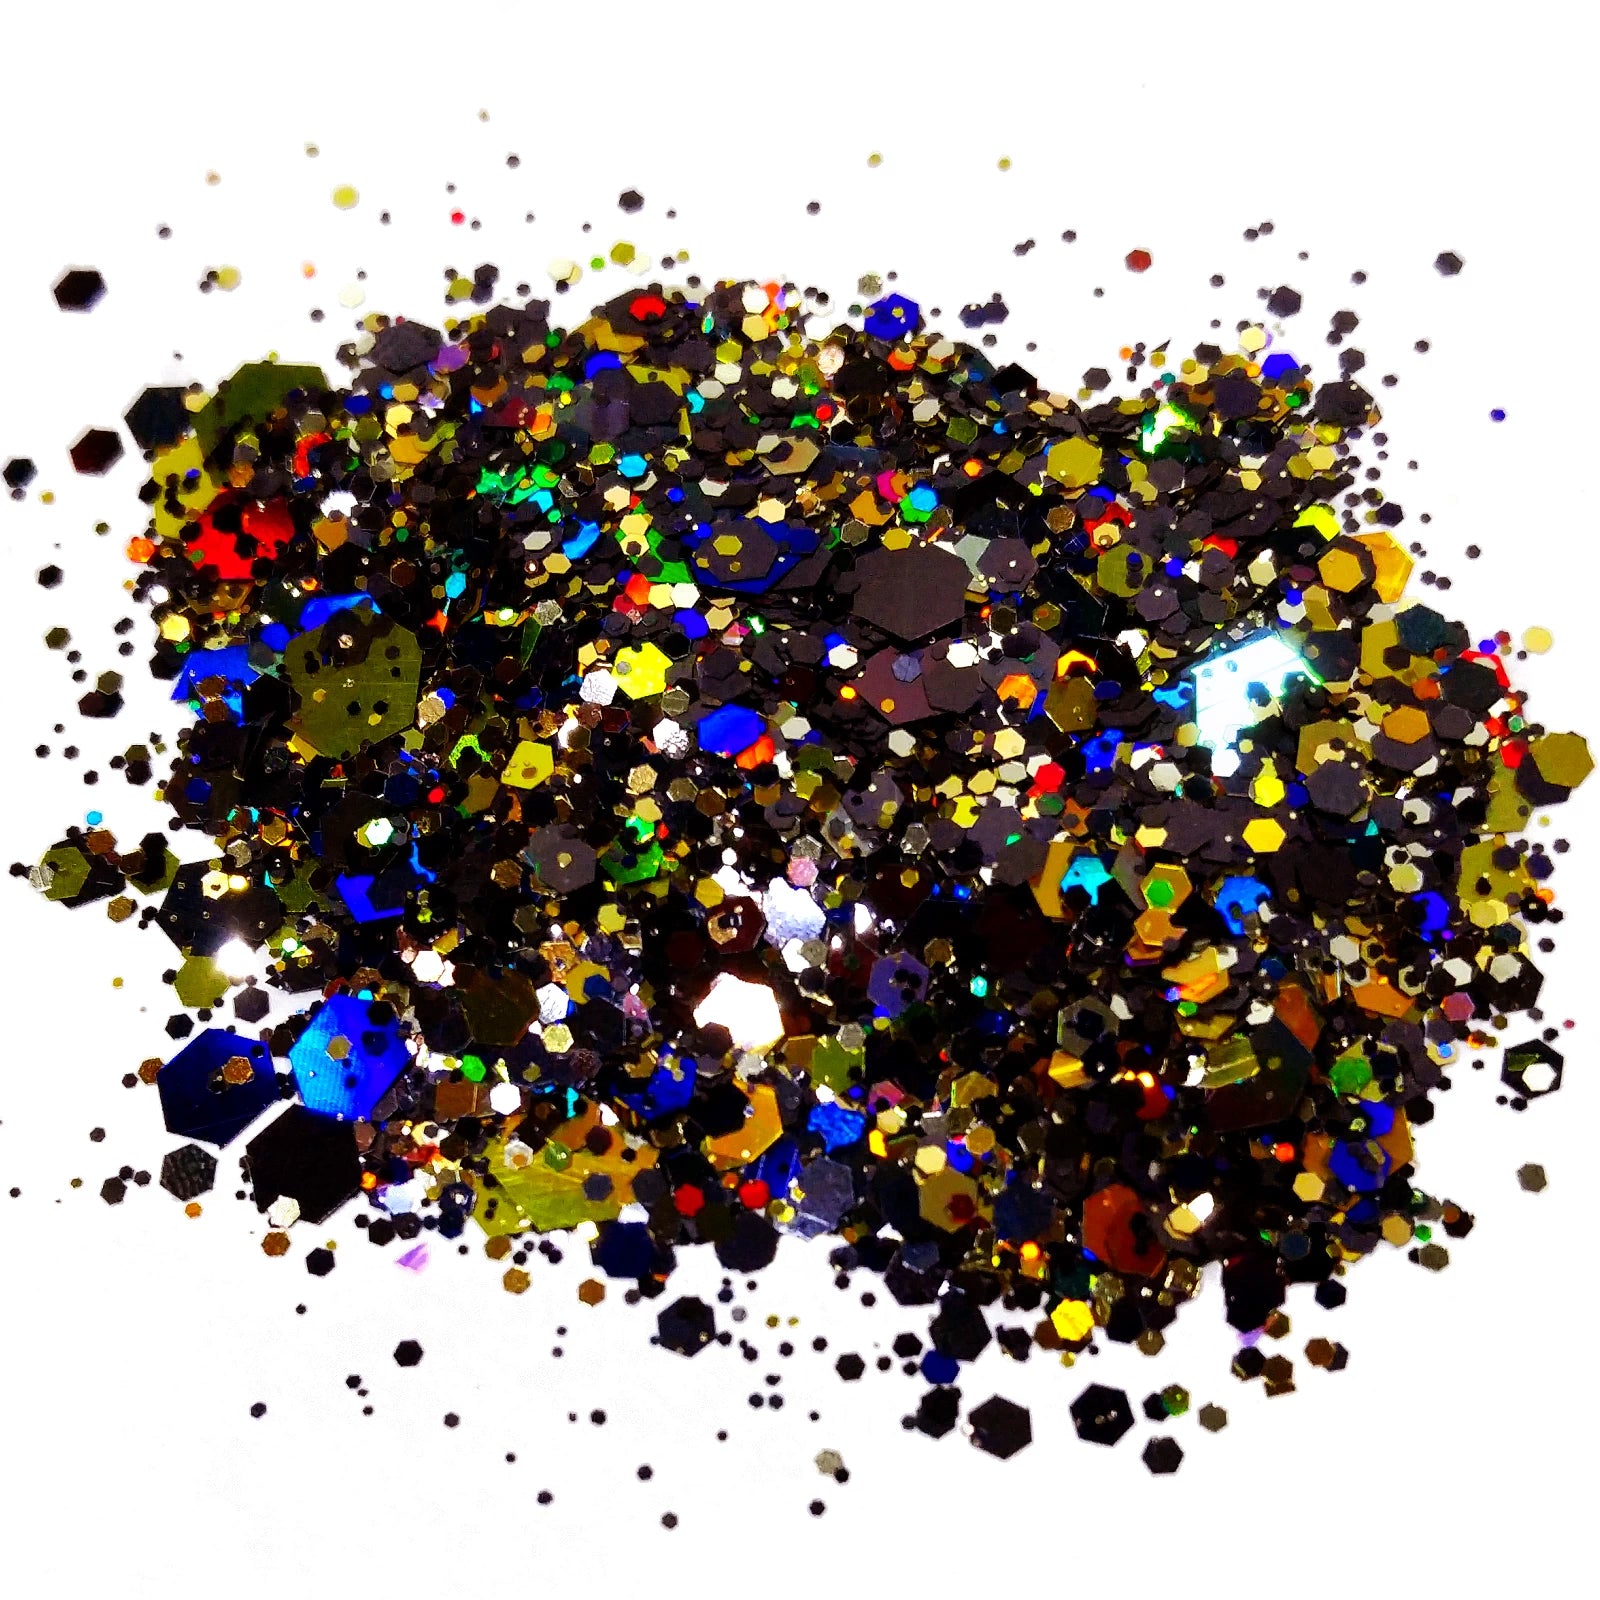 Black And Gold Holographic Chunky Glitter Mix - Black Magick By Crazoulis Glitter